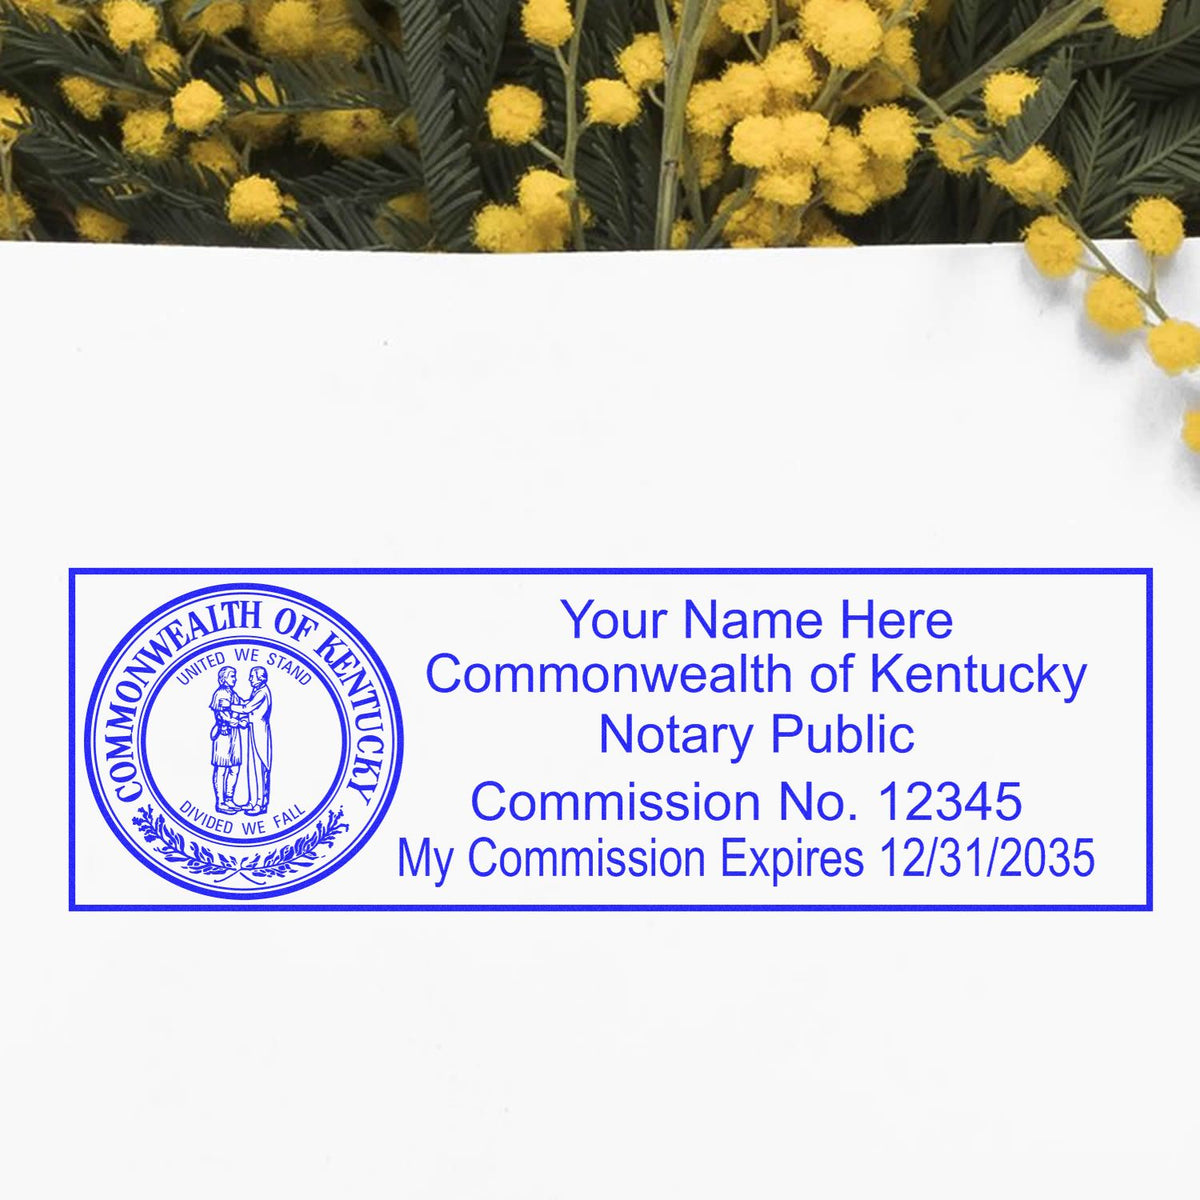 A photograph of the Heavy-Duty Kentucky Rectangular Notary Stamp stamp impression reveals a vivid, professional image of the on paper.